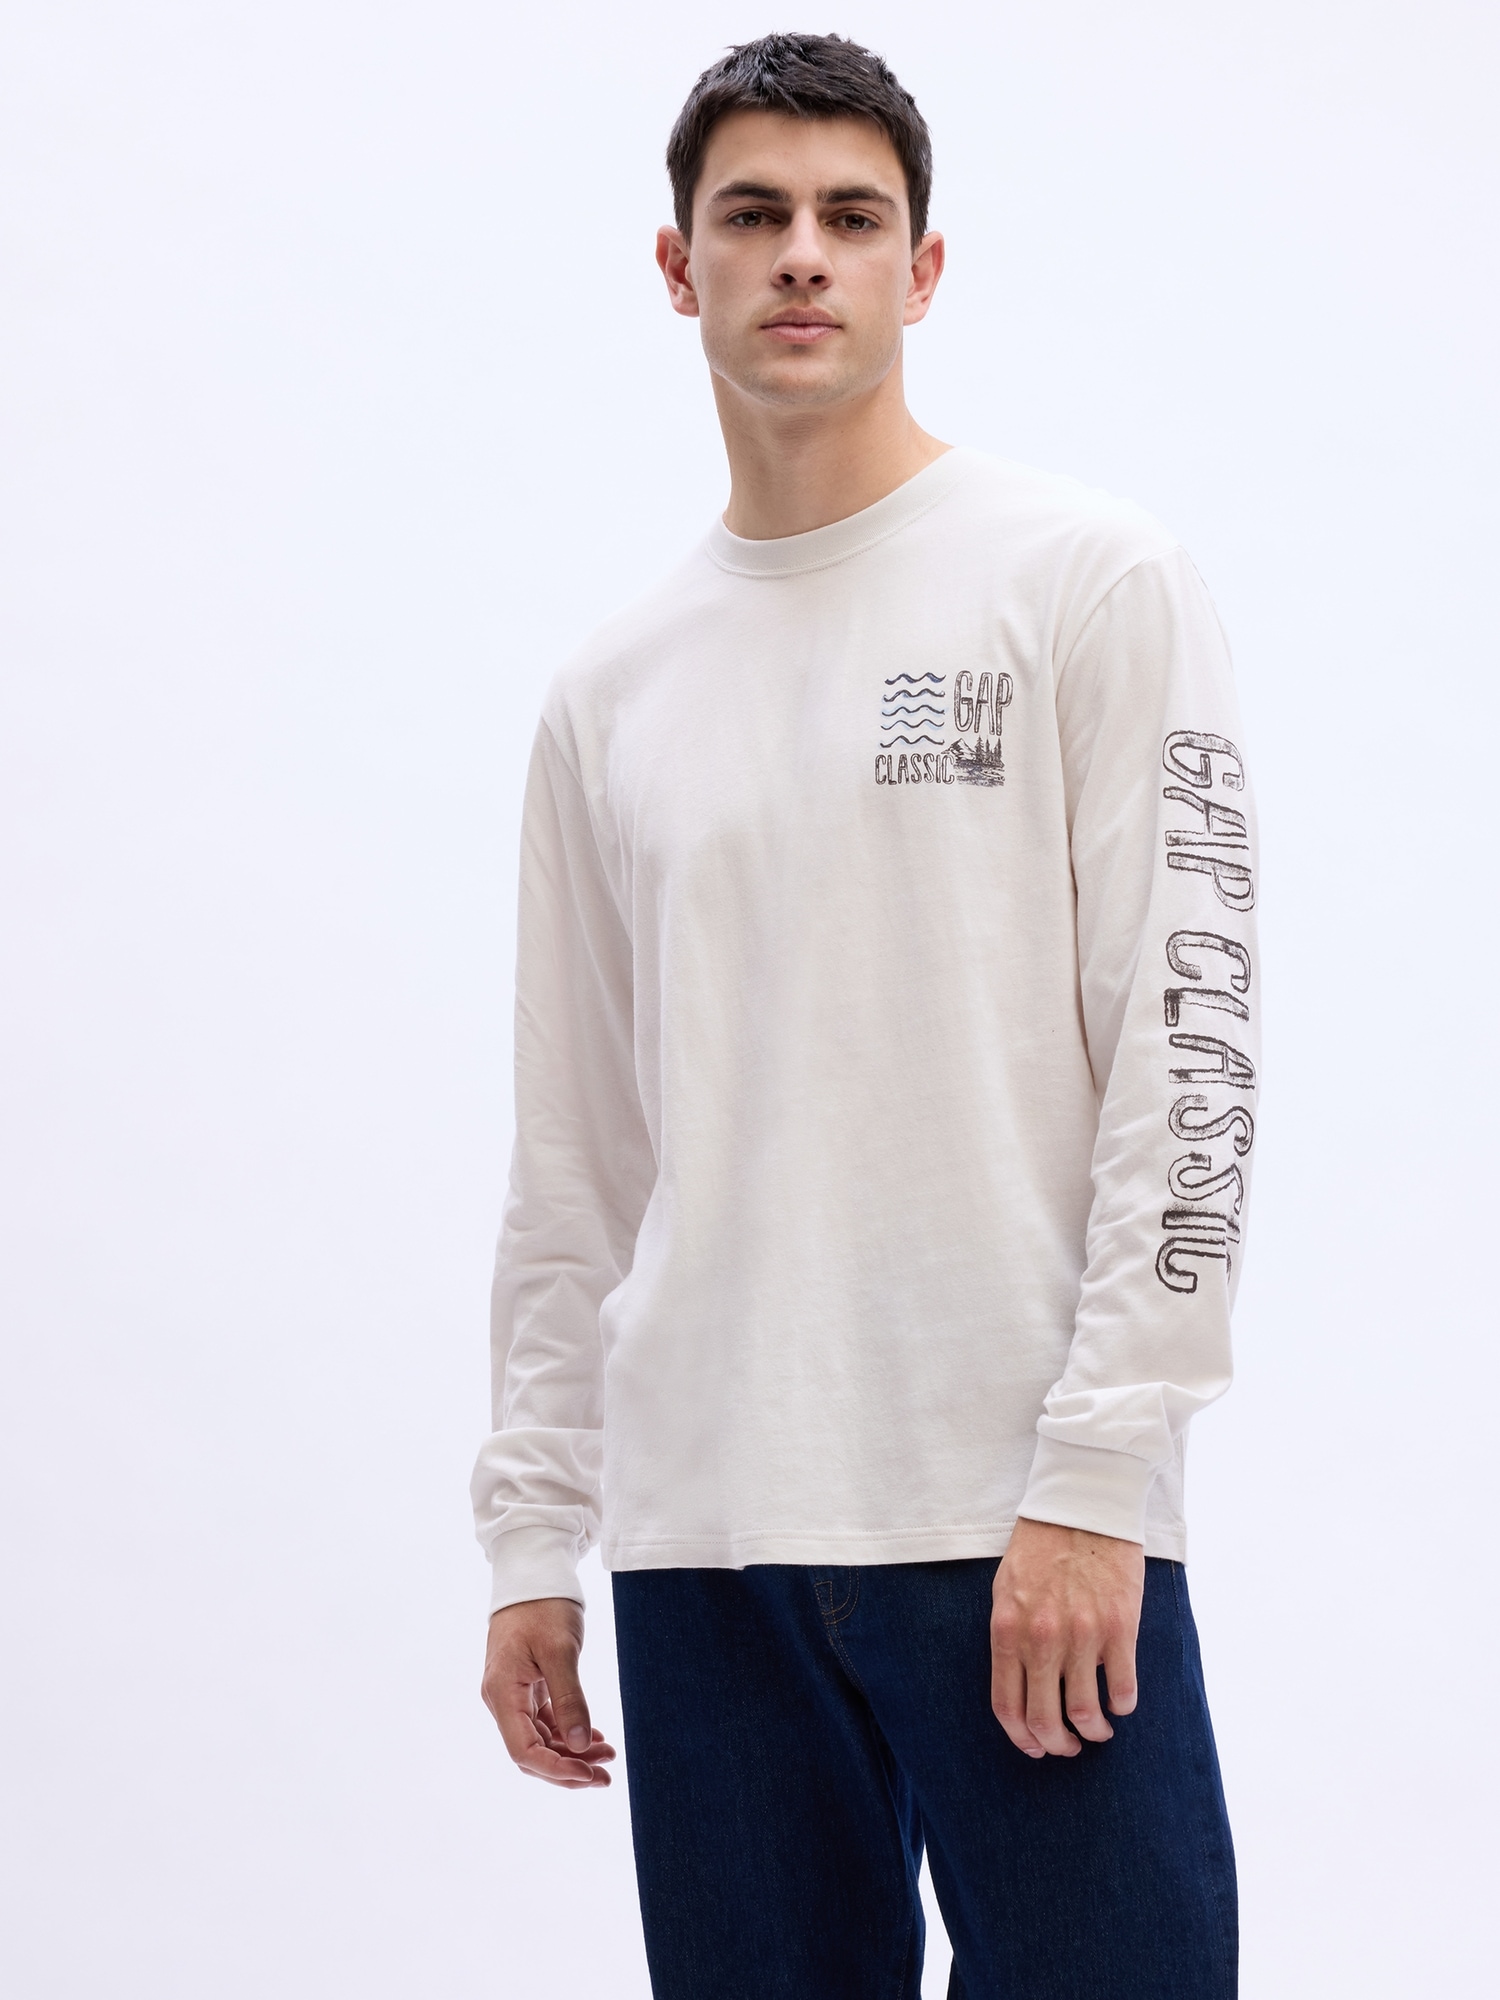 Relaxed Gap Graphic T-Shirt | Gap Factory